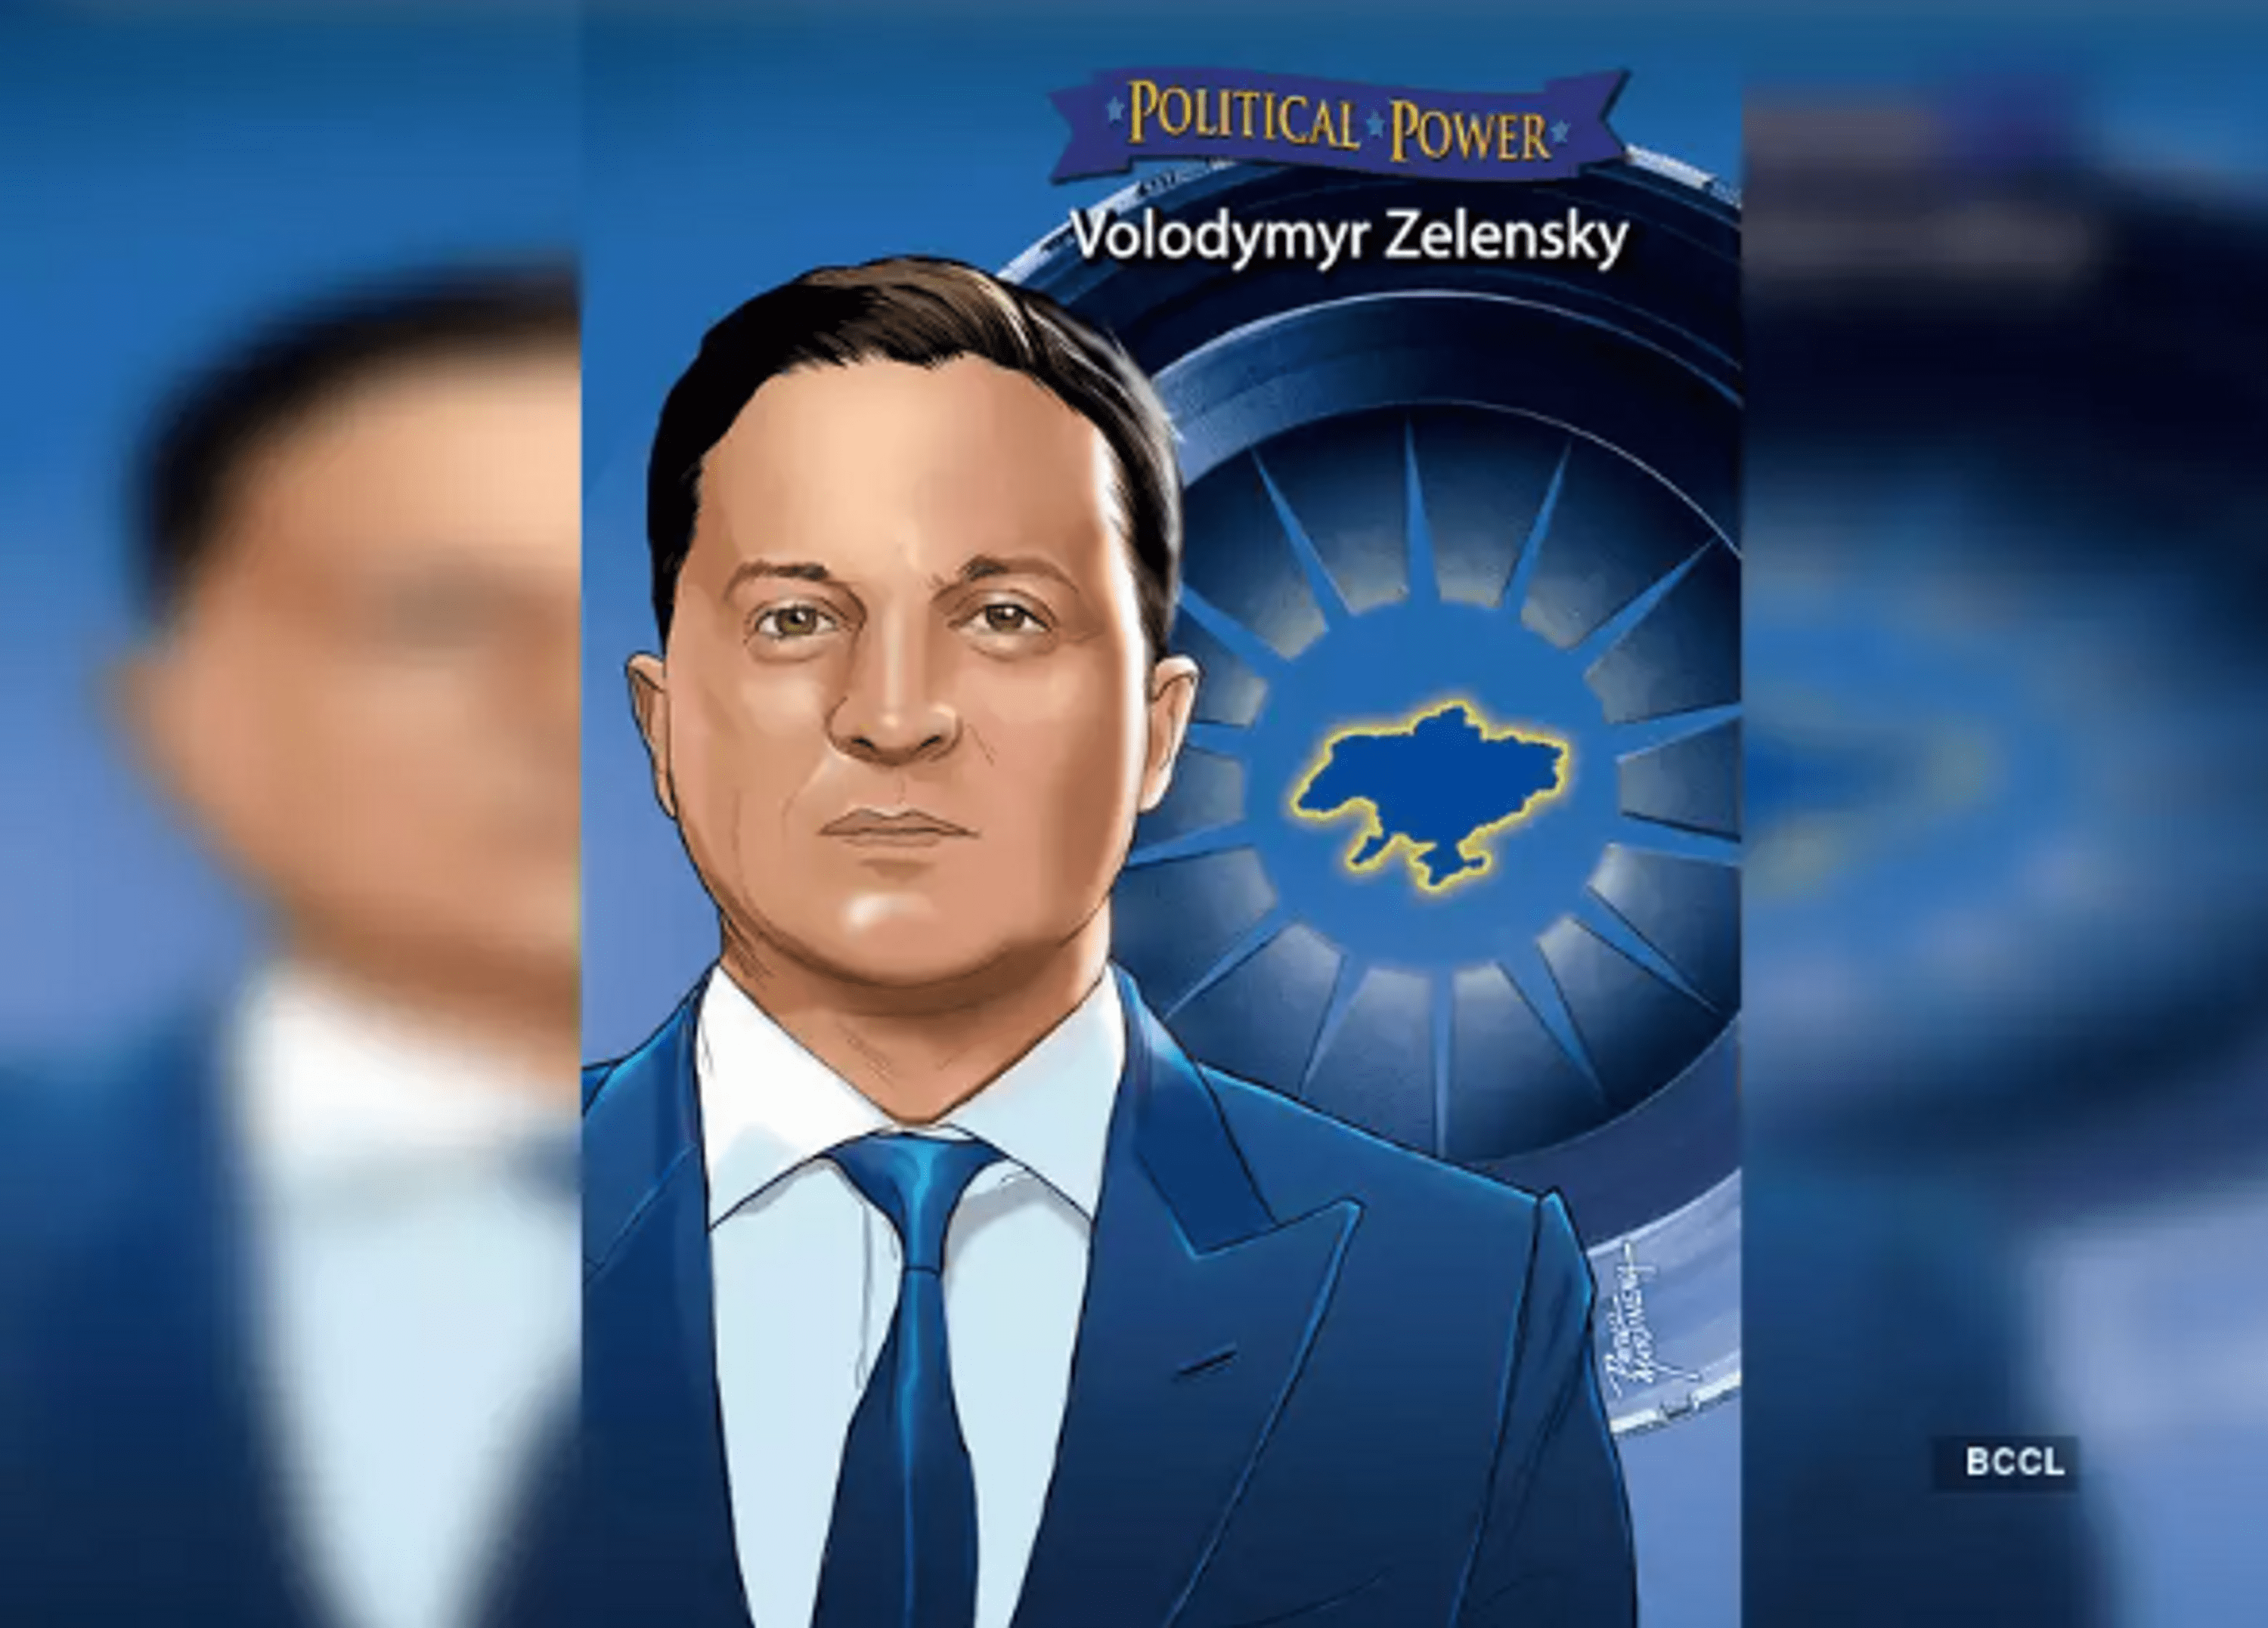 ”a-comic-book-about-the-life-of-ukrainian-president-volodymyr-zelenskyy-has-been-released”